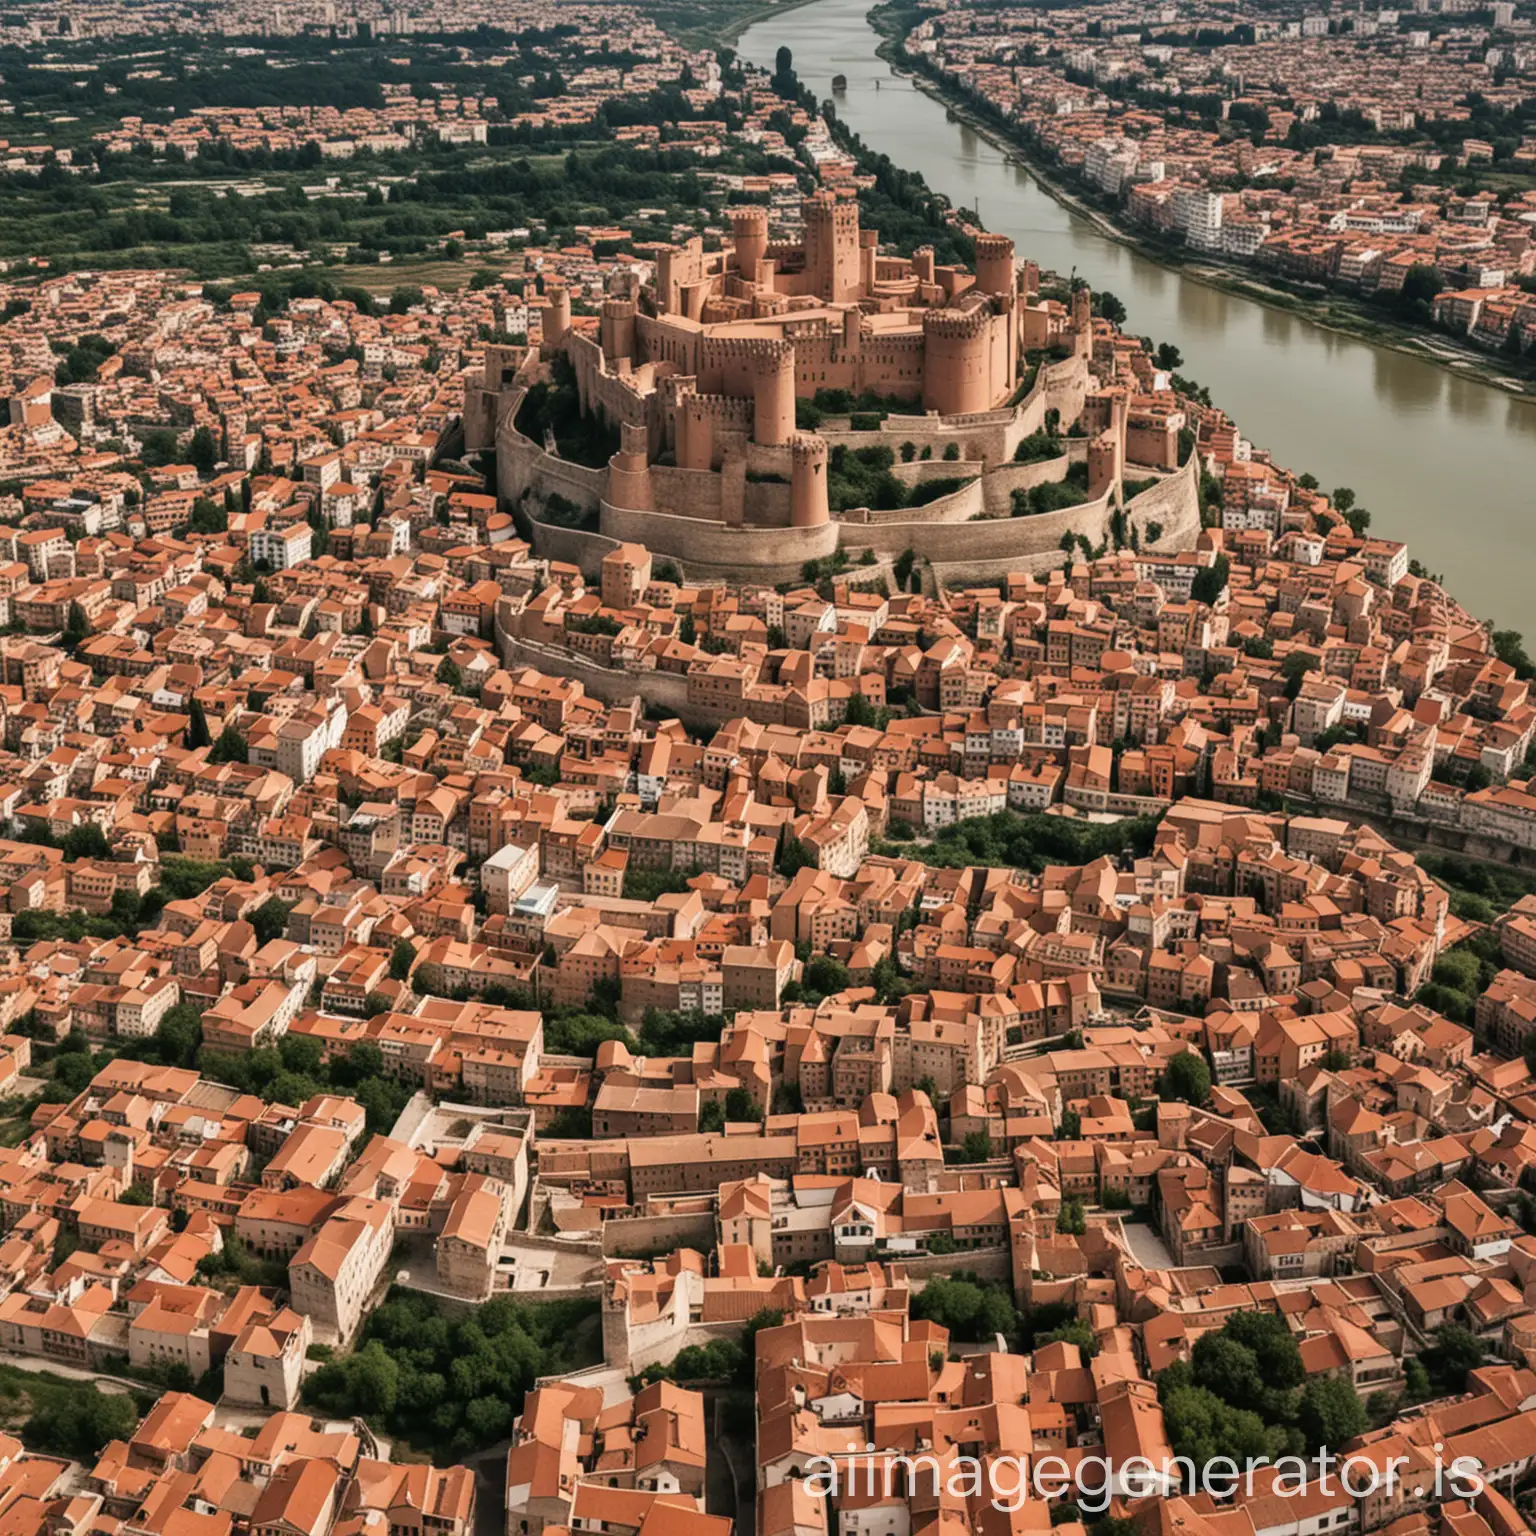 TerracottaTiled-Capital-City-with-Vineyards-Along-the-River-Bend